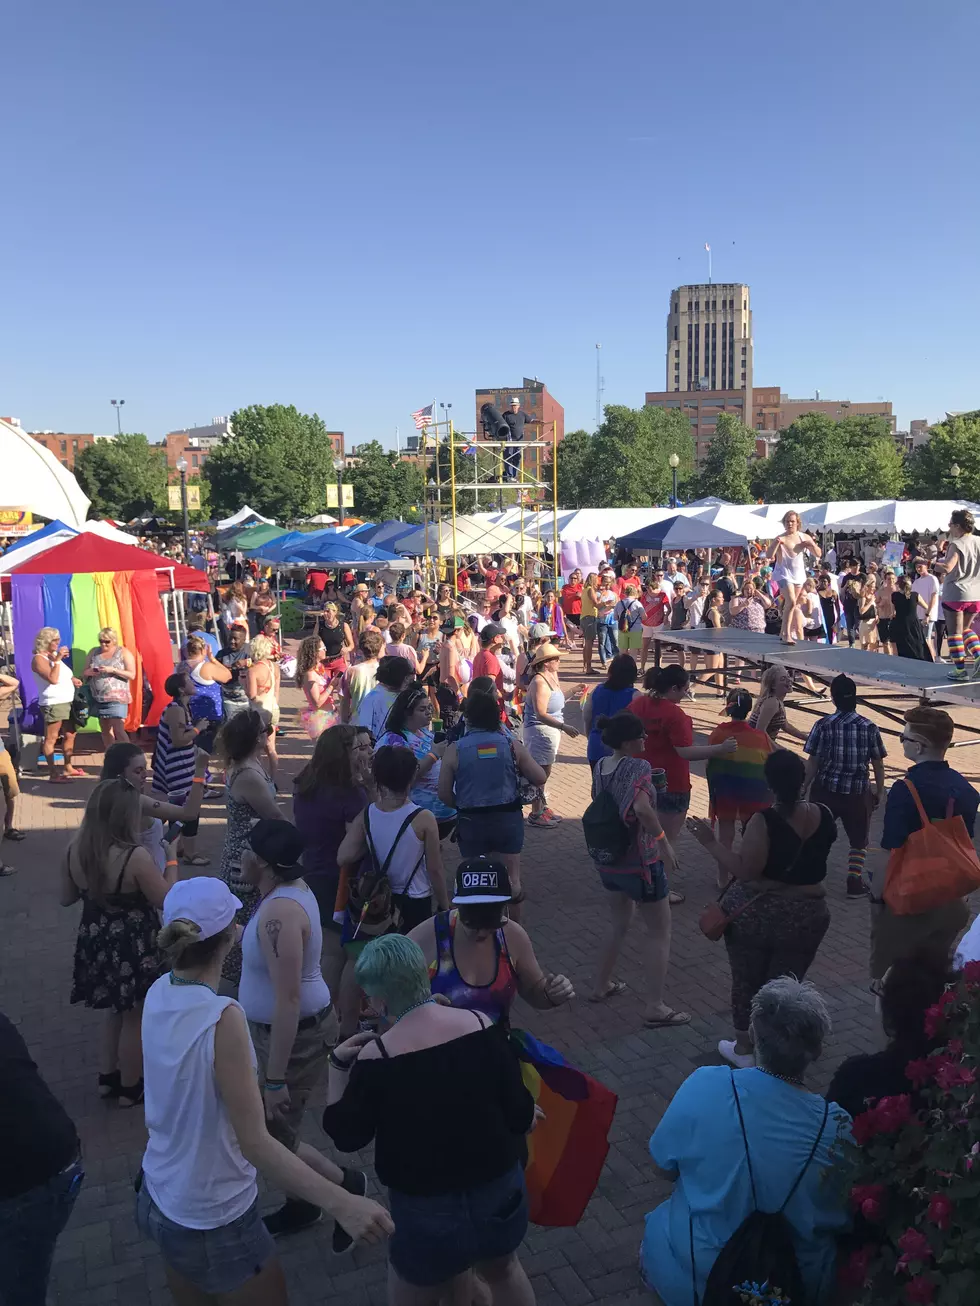 A Complete Guide To Kalamazoo Pride 2019